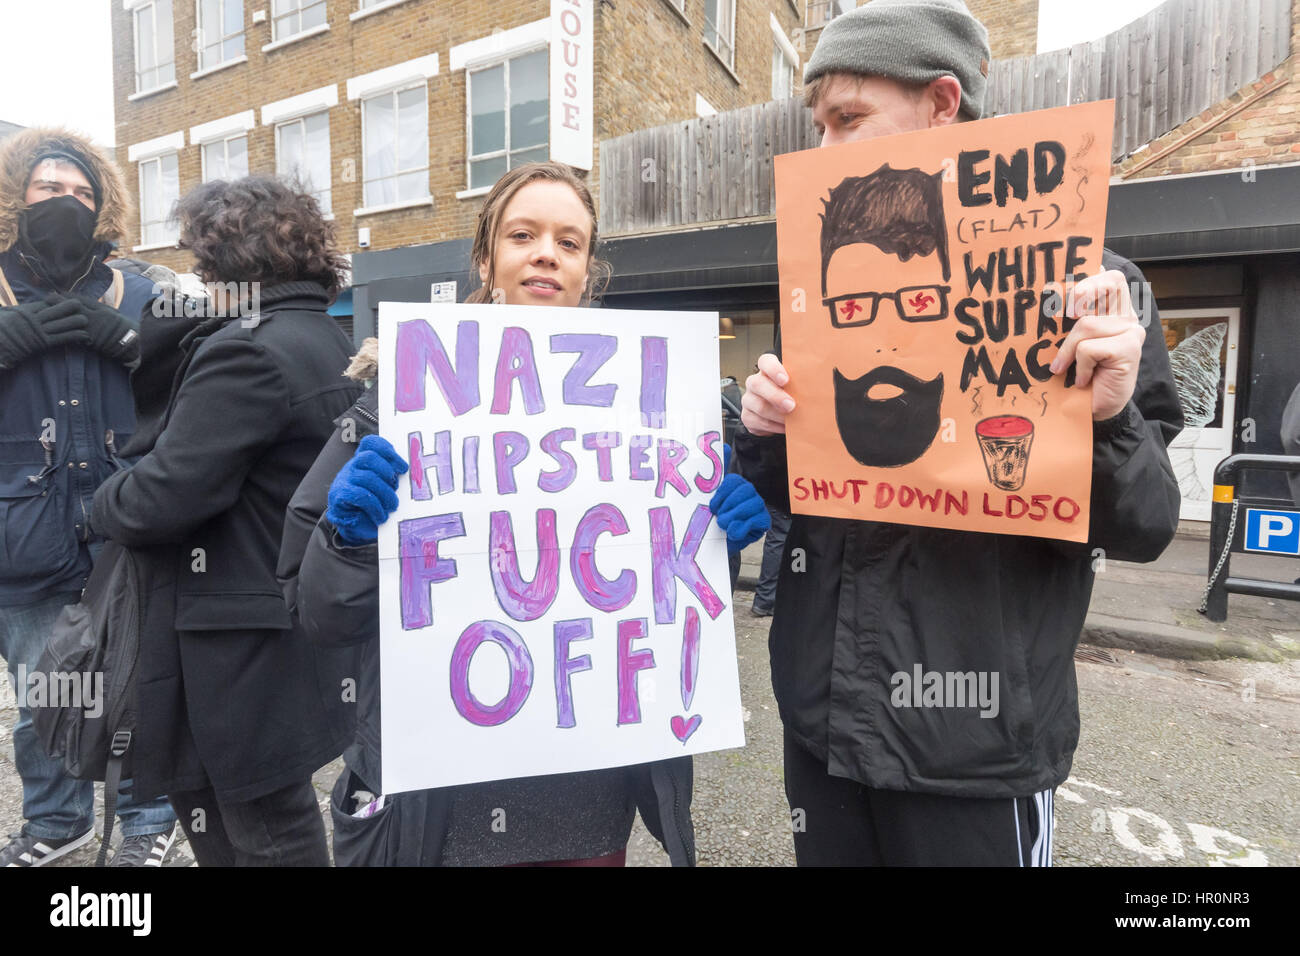 London, UK. 25th February 2017. Two of several hundred people from East London outside the LD50 gallery in Dalston hold posters against Nazi hipsters. Protesters say the gallery, named after the dose that kills half of those who take a poison, is in one of London's more diverse areas has promoted fascists, neo-Nazis, misogynists, racists and Islamophobes and 'has been responsible for one of the most extensive neo-Nazi cultural programmes to appear in London in the last decade.' The protesters want the gallery to be closed. Credit: Peter Marshall/Alamy Live News Stock Photo